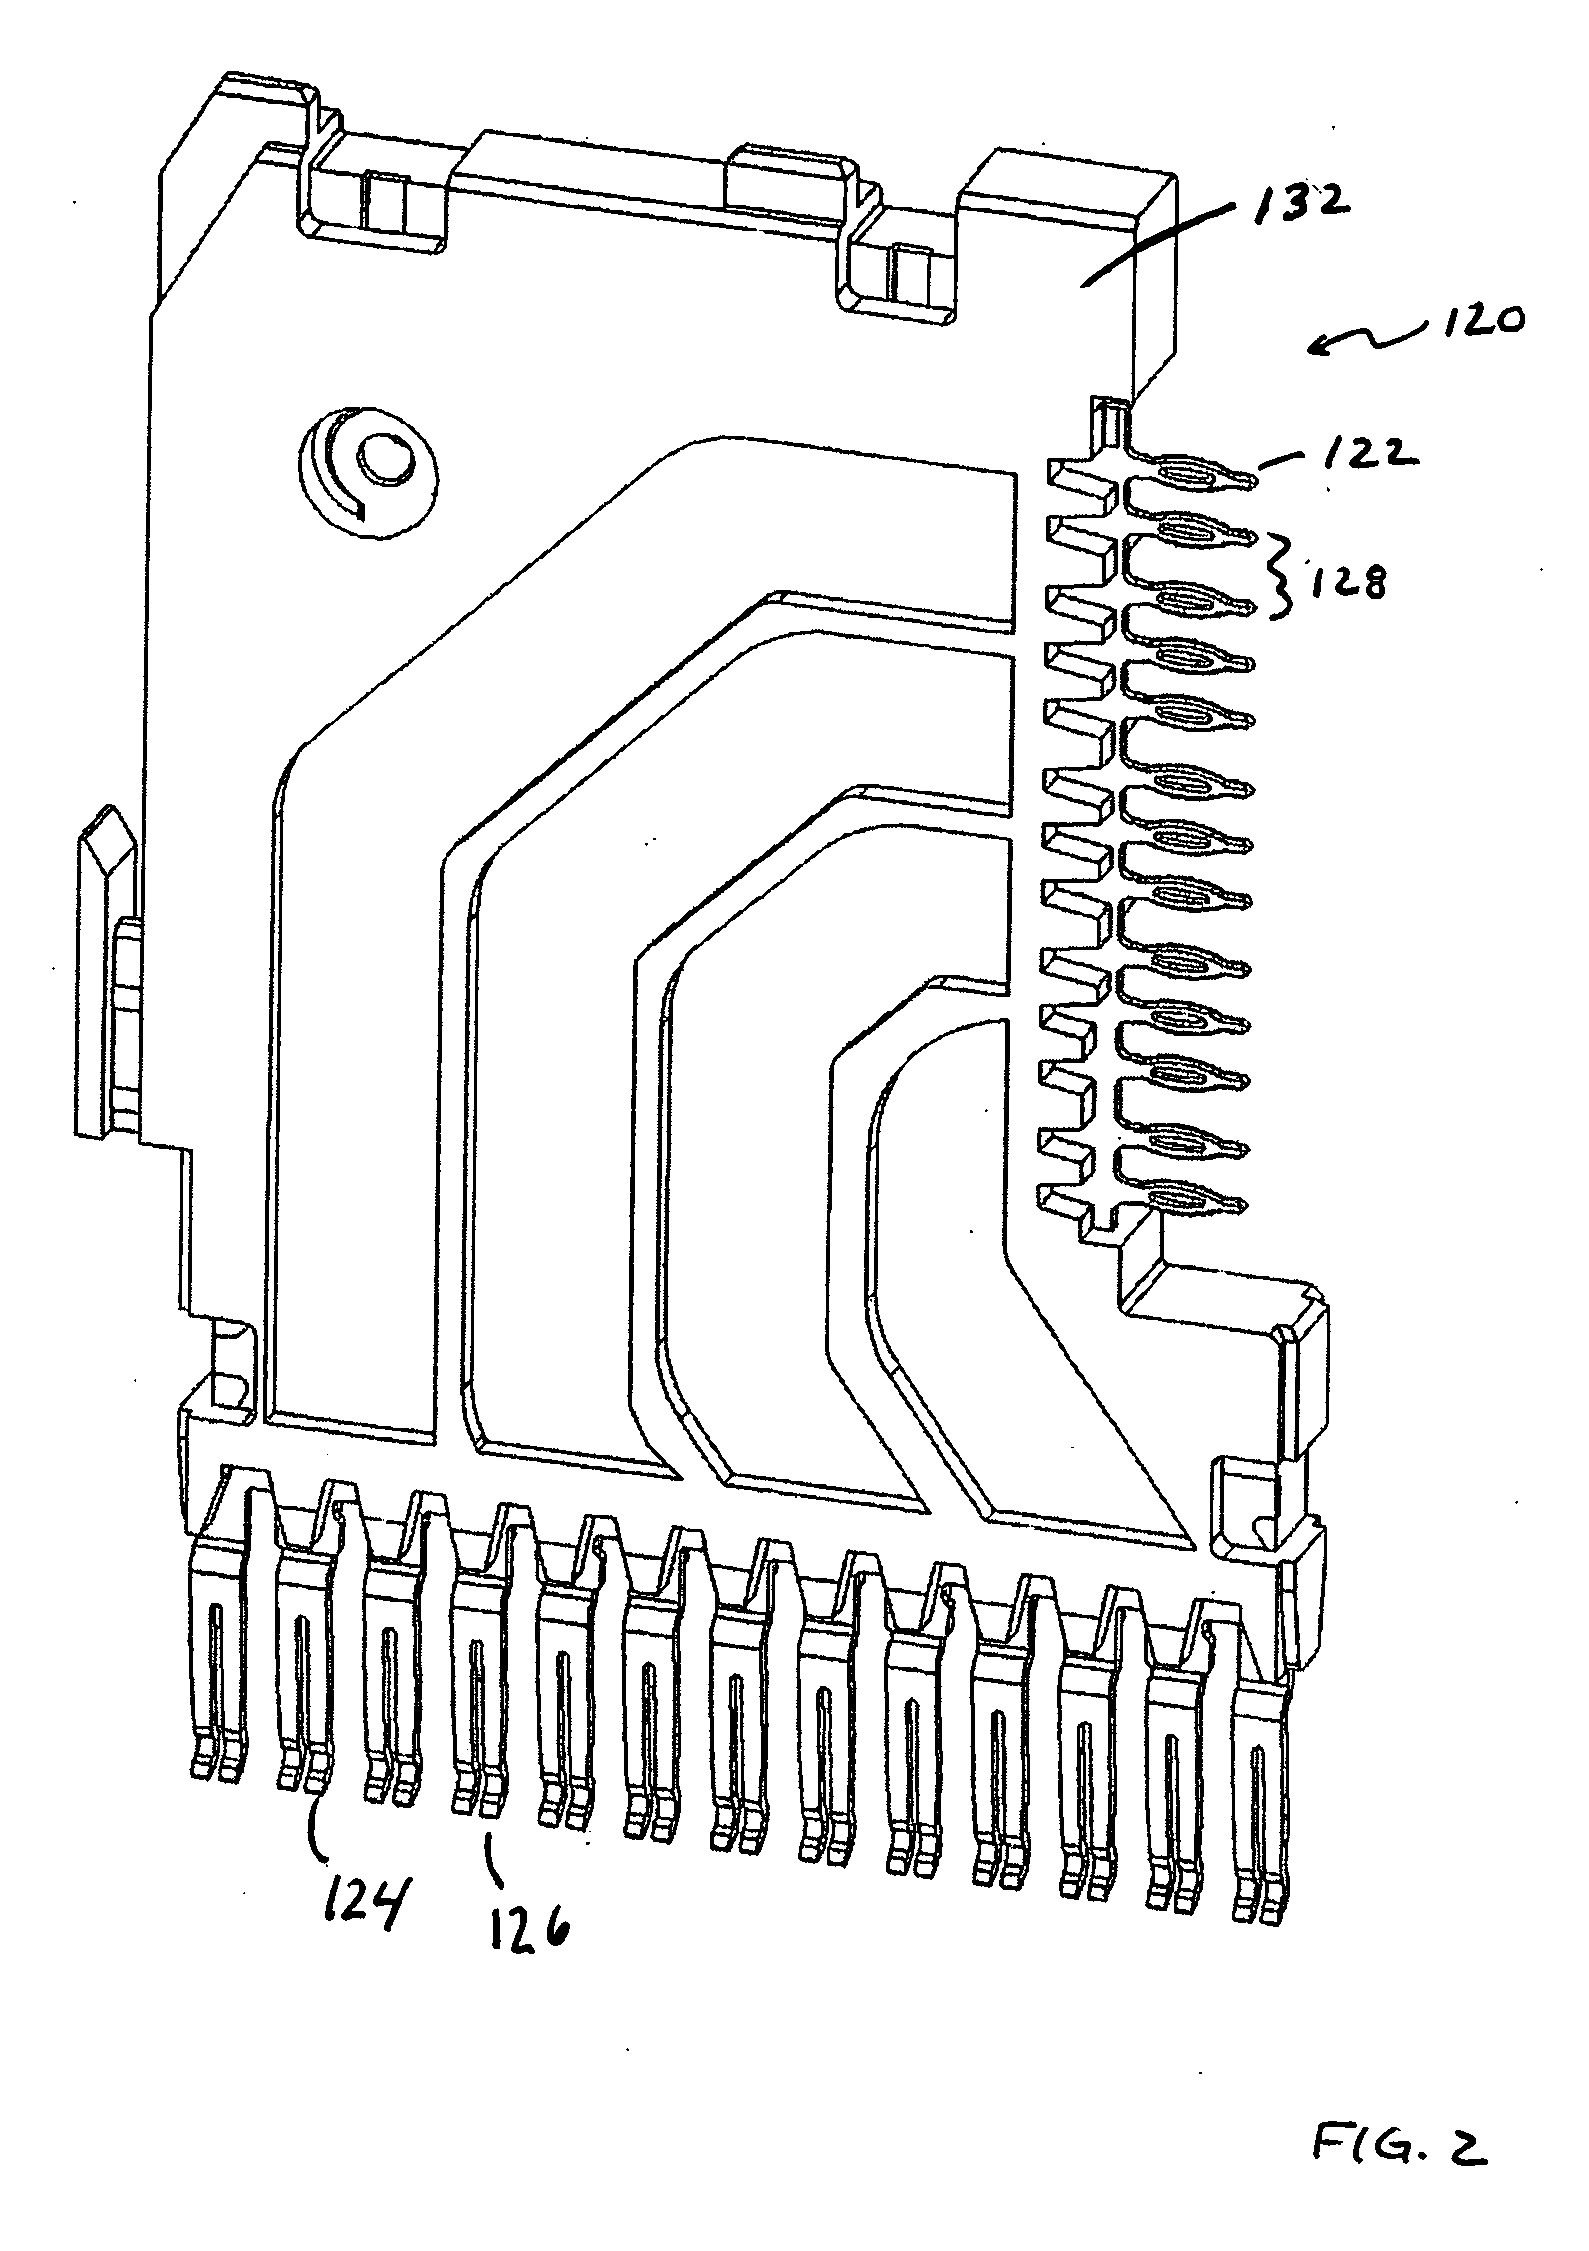 High speed high density electrical connector